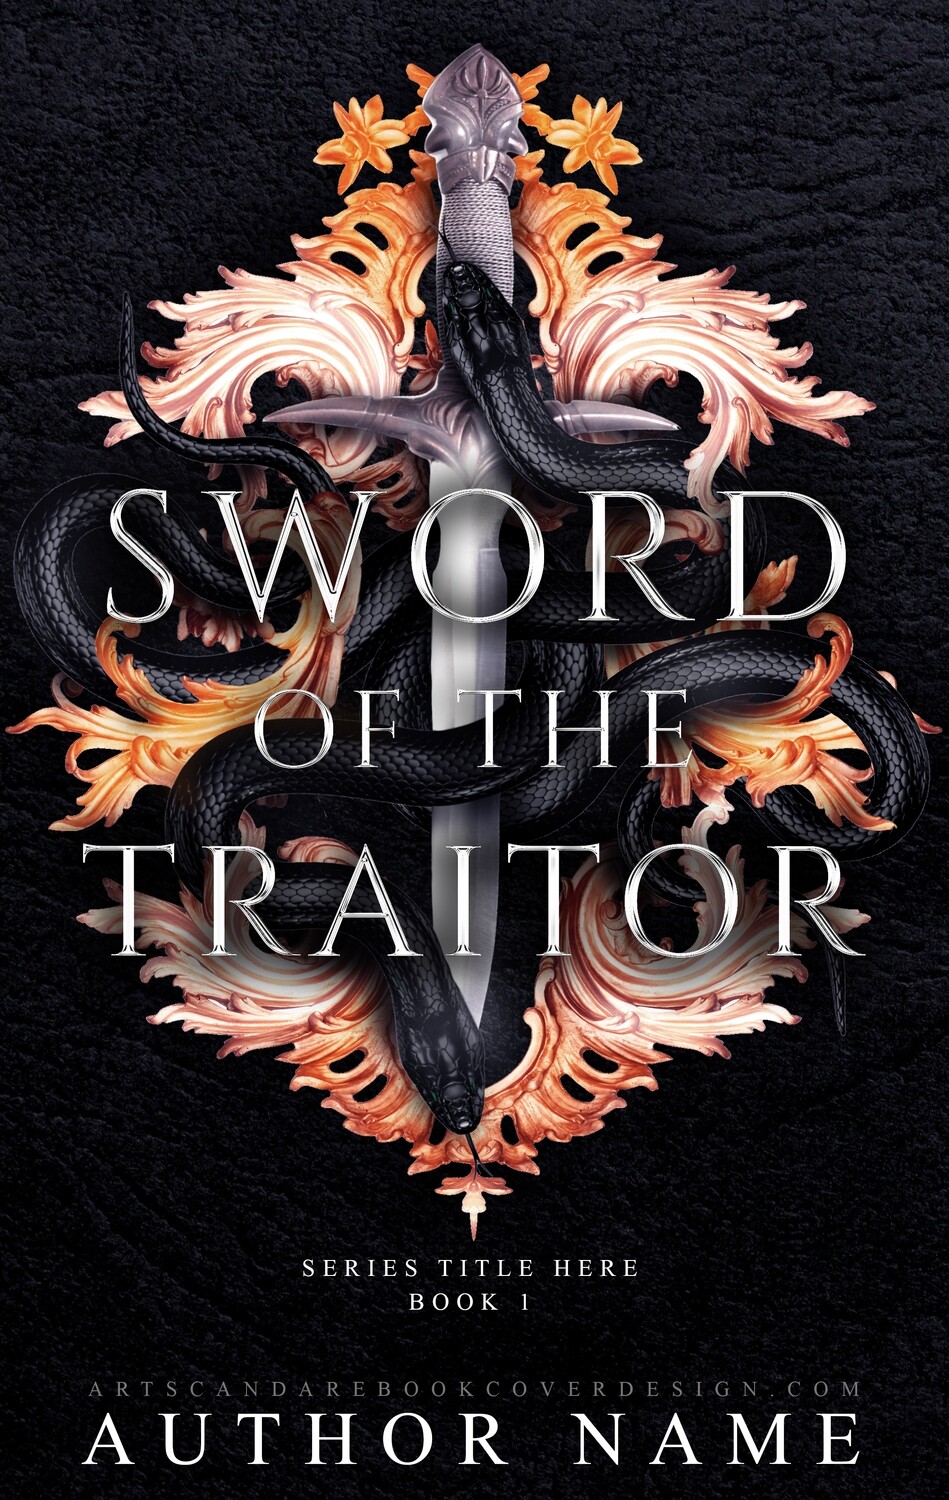 SWORD OF THE TRAITOR